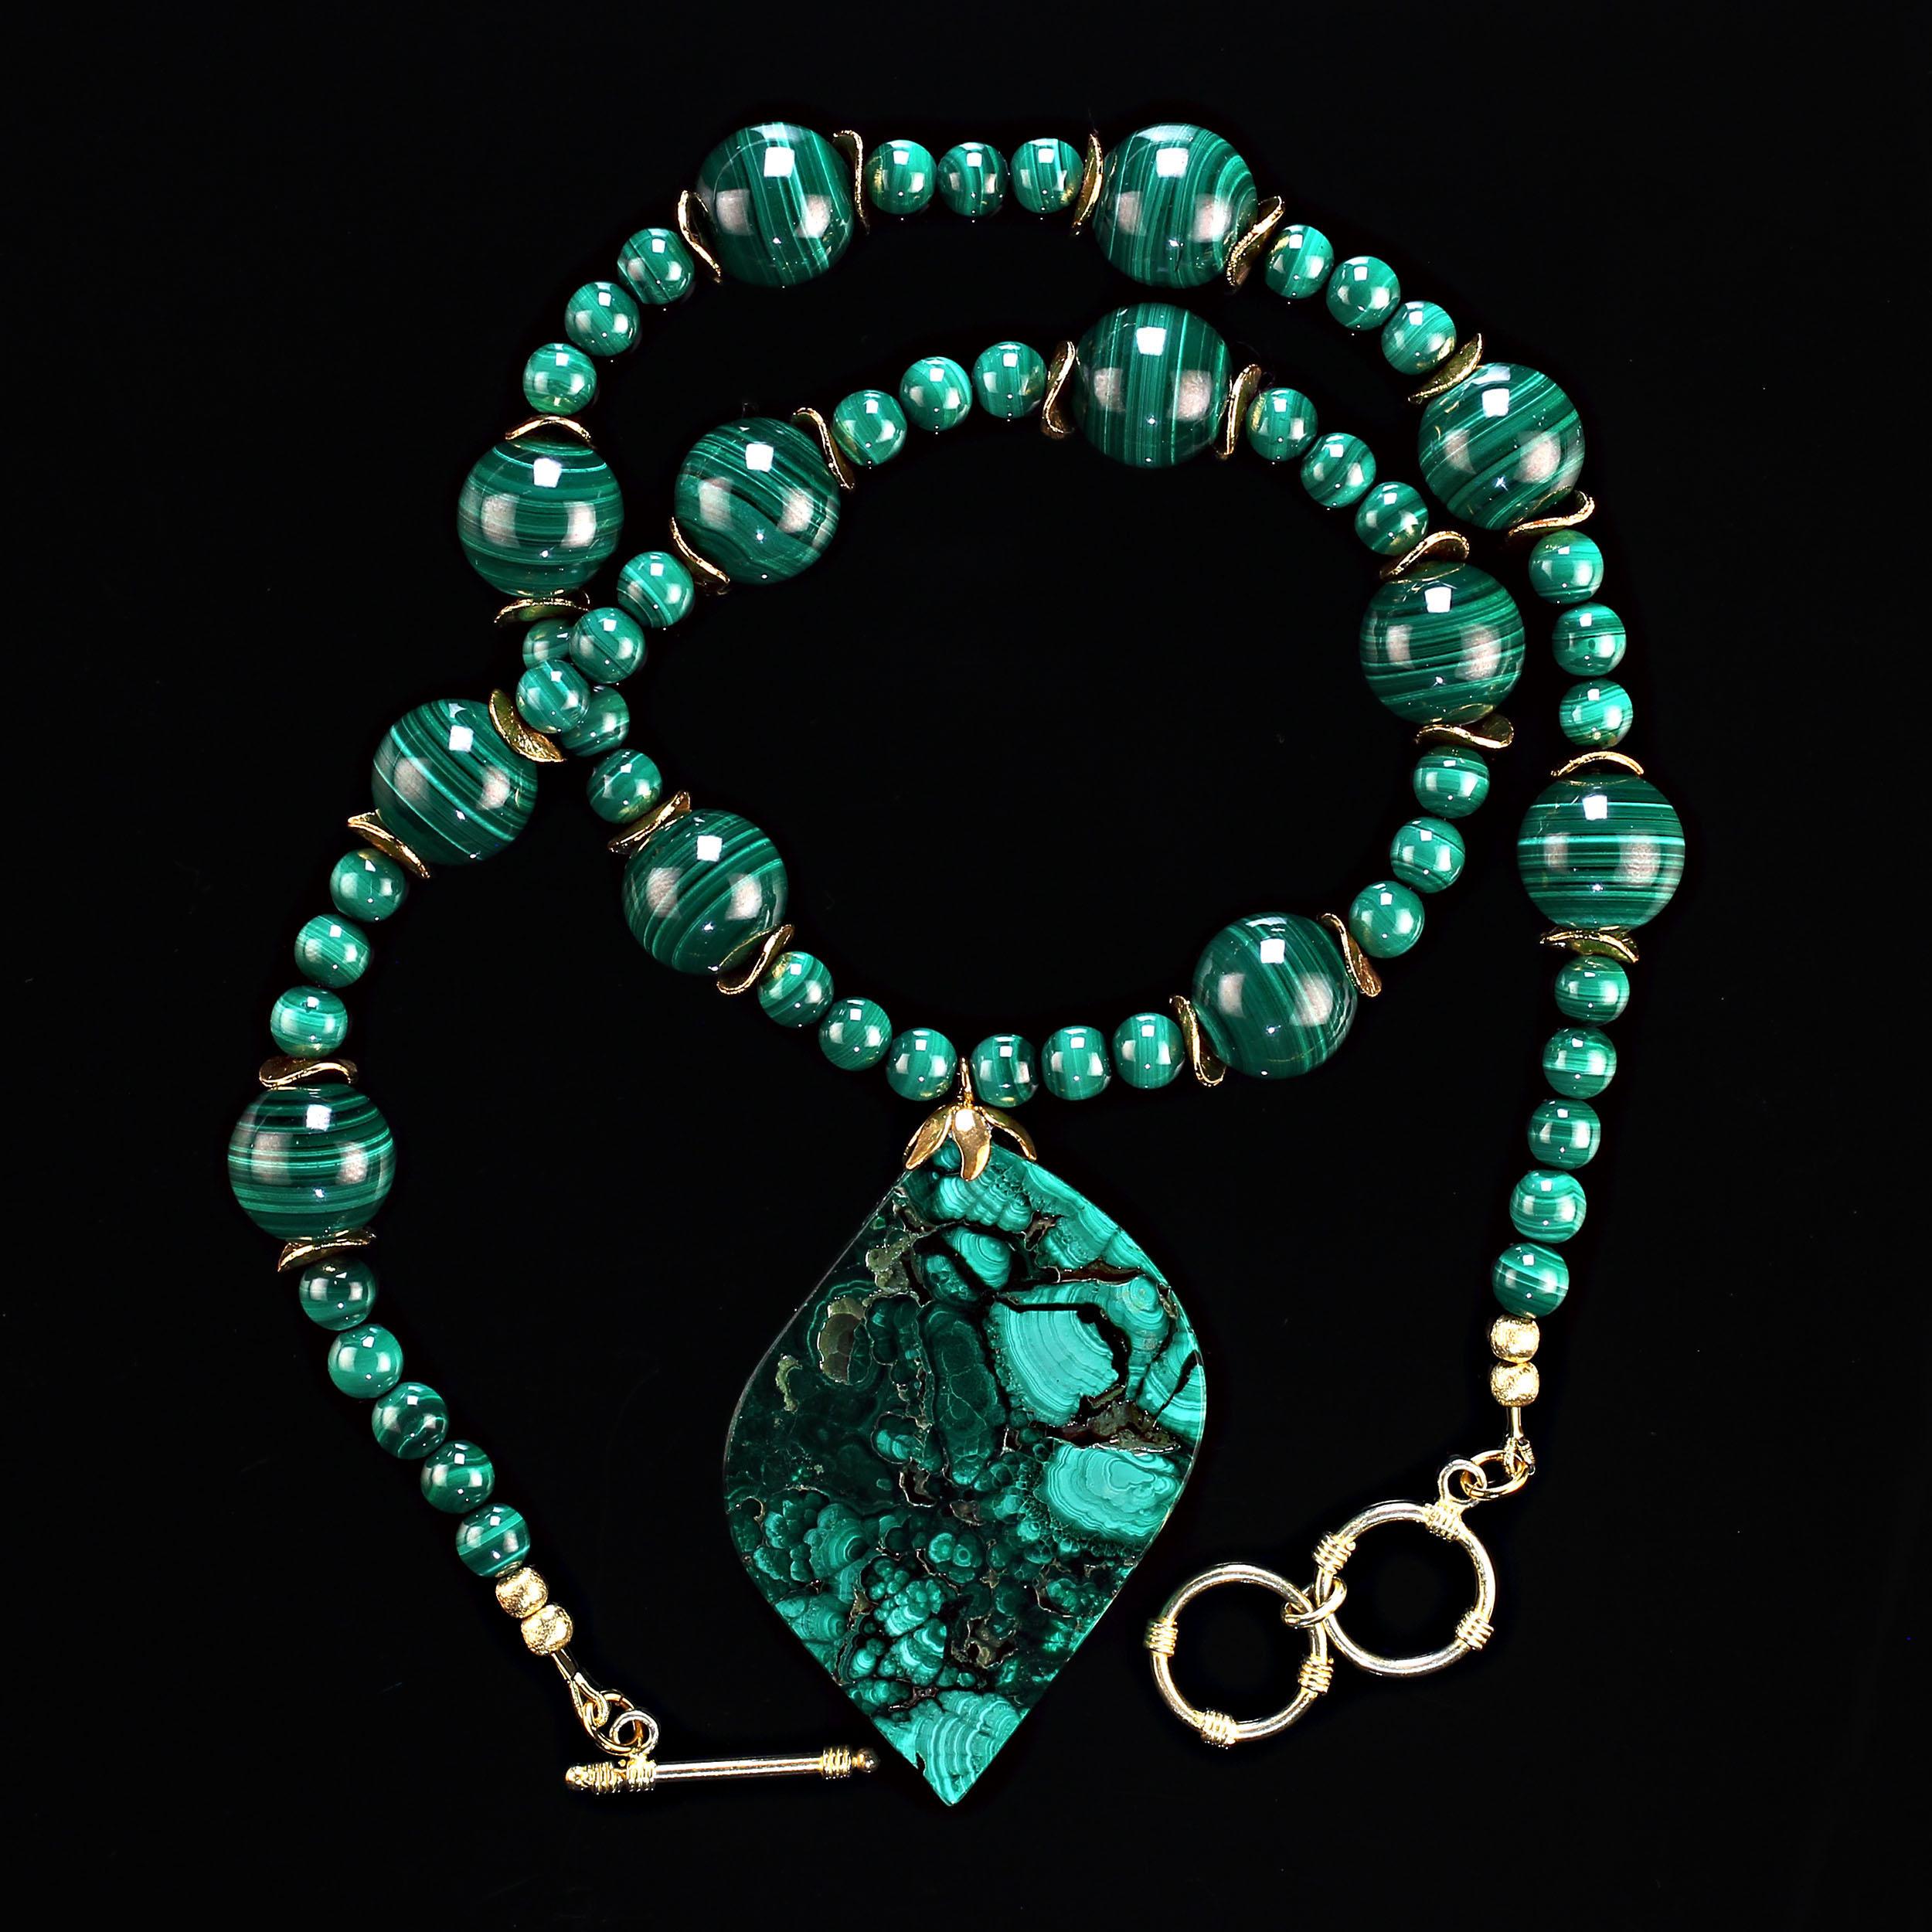 22 Inch necklace of fabulous malachite in 16MM and 6MM smooth rounds with gold tone flutters.  The free form malachite pendant is 2.25 x 1.50 inches. The 22 inch necklace is secured with a gold-plate two ring toggle clasp.  MN2350